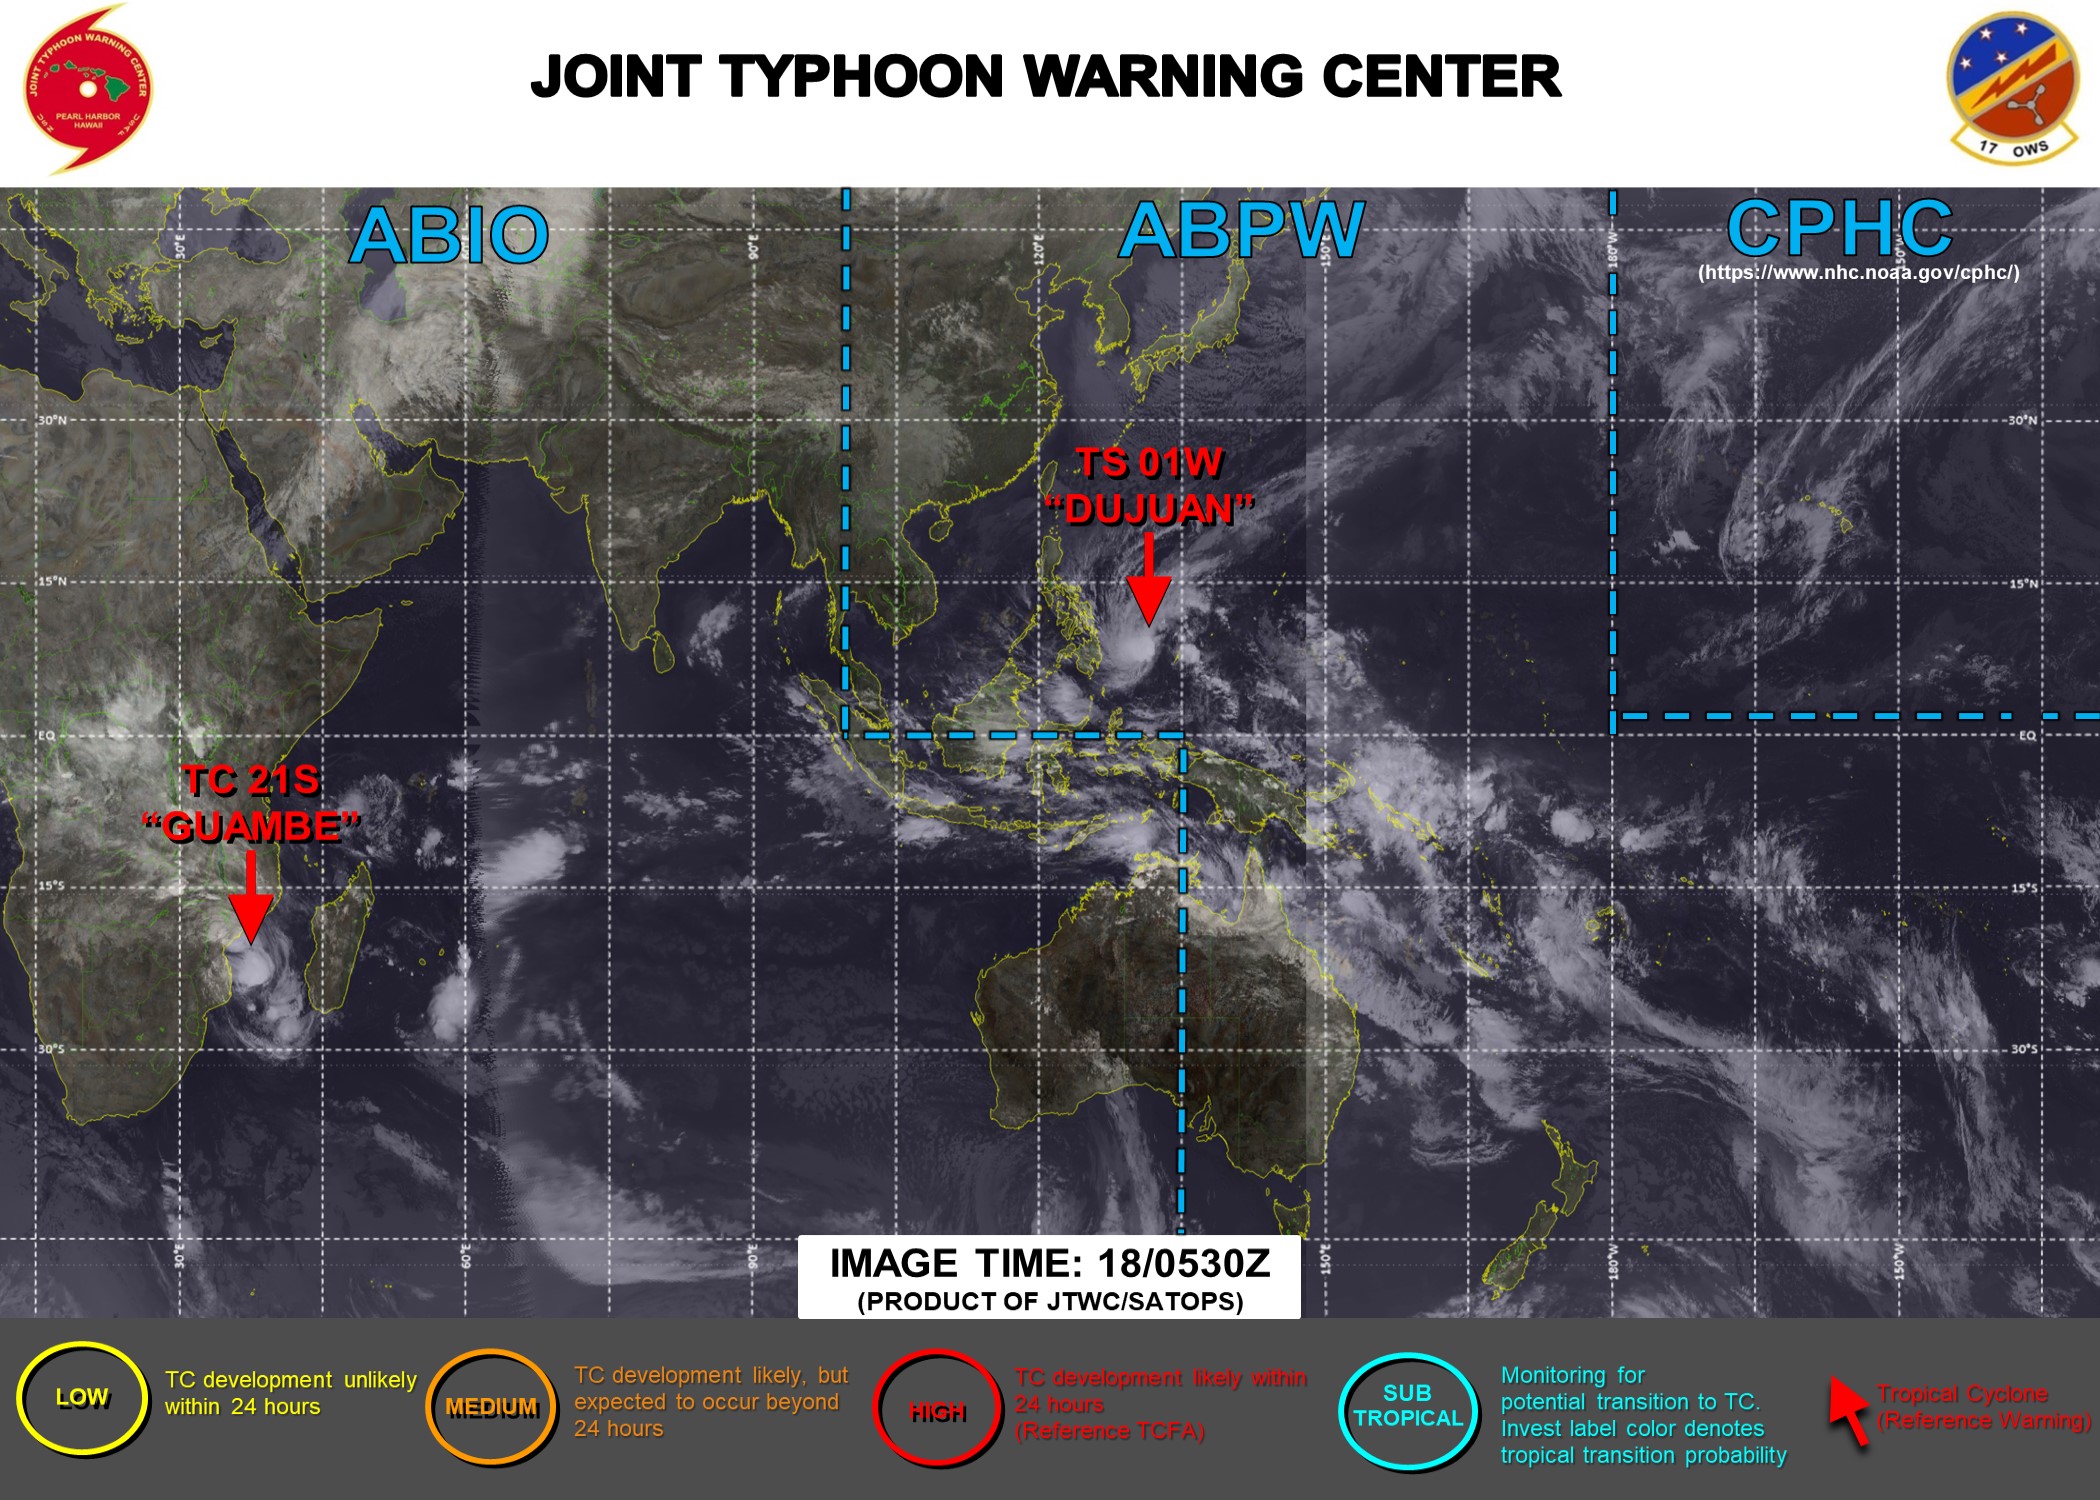 18/06UTC. JTWC IS ISSUING 6HOURLY WARNINGS ON 01W AND 12HOURLY WARNINGS ON 21S. 3 HOURLY SATELLITE BULLETINS ARE ISSUED FOR BOTH SYSTEMS.